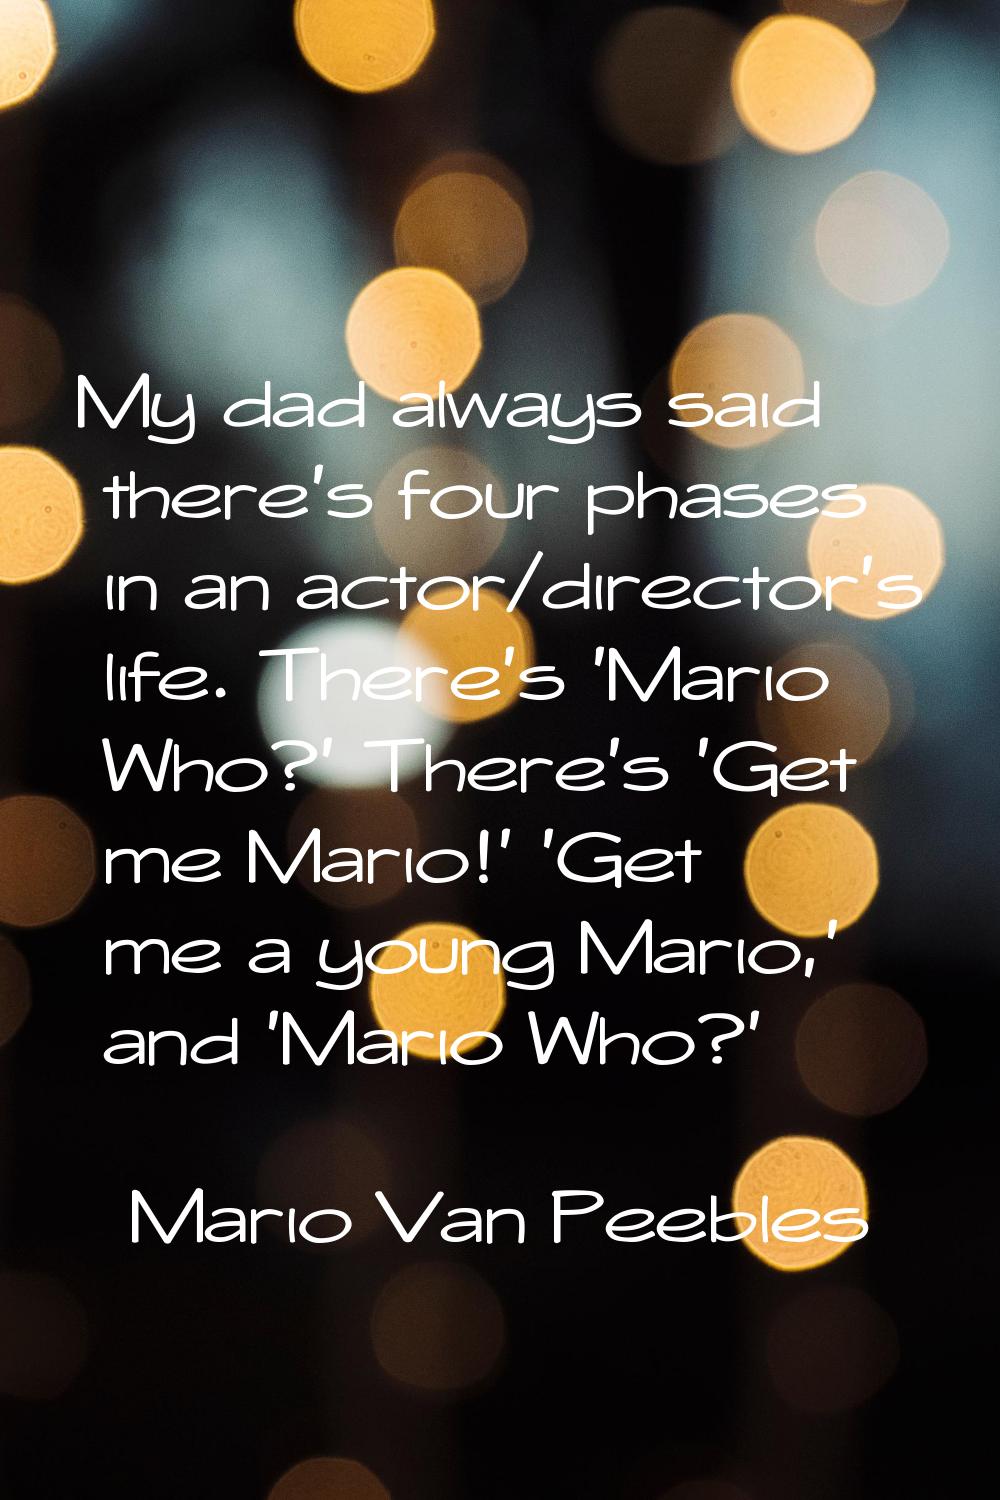 My dad always said there's four phases in an actor/director's life. There's 'Mario Who?' There's 'G